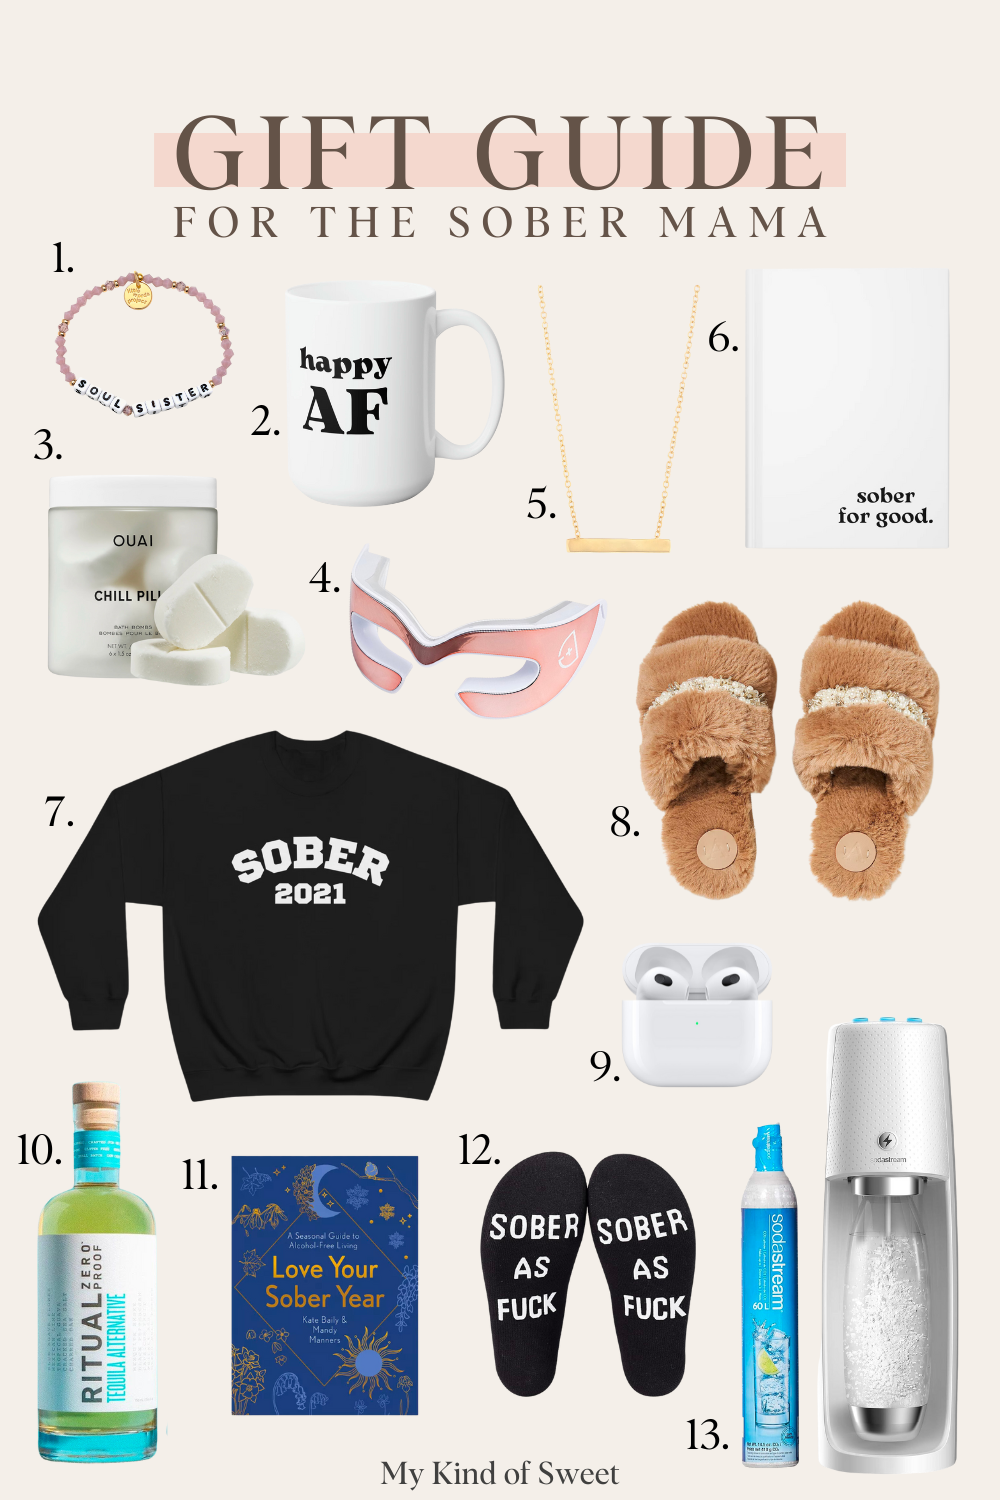 HOLIDAY GIFT GUIDE: FOR YOUR MOM